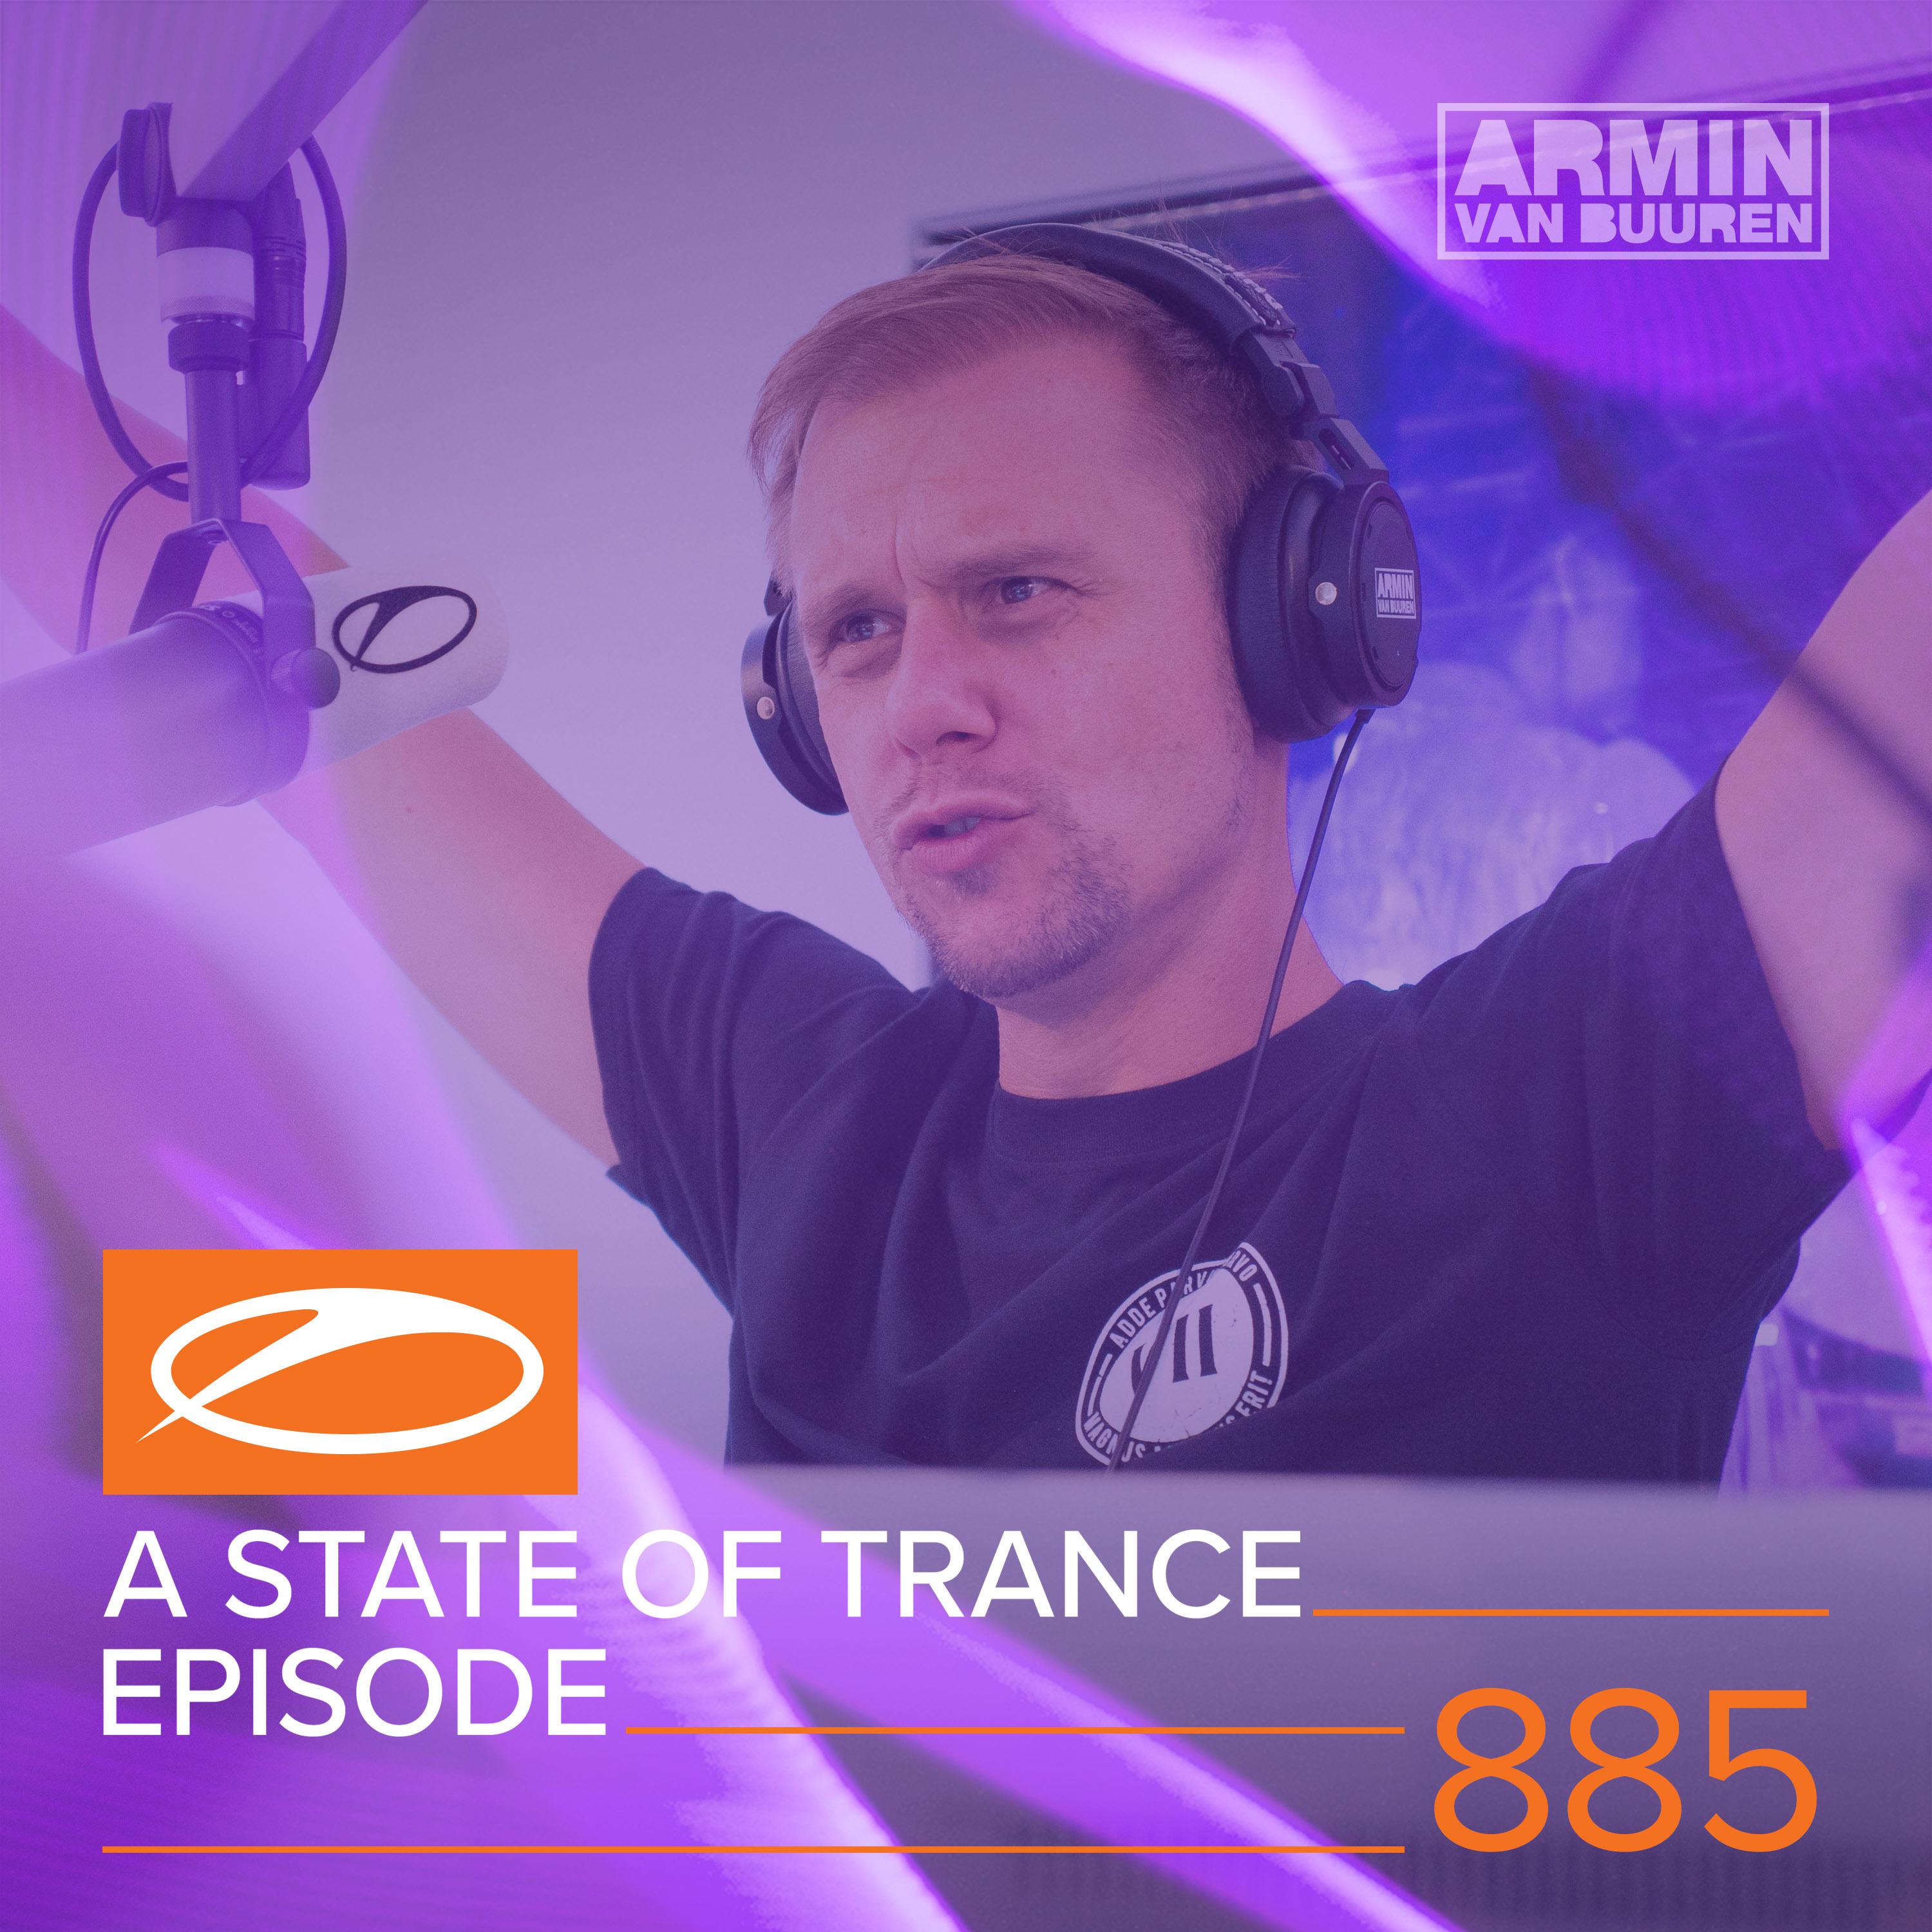 A State Of Trance (ASOT 885) (Coming Up, Pt. 2)